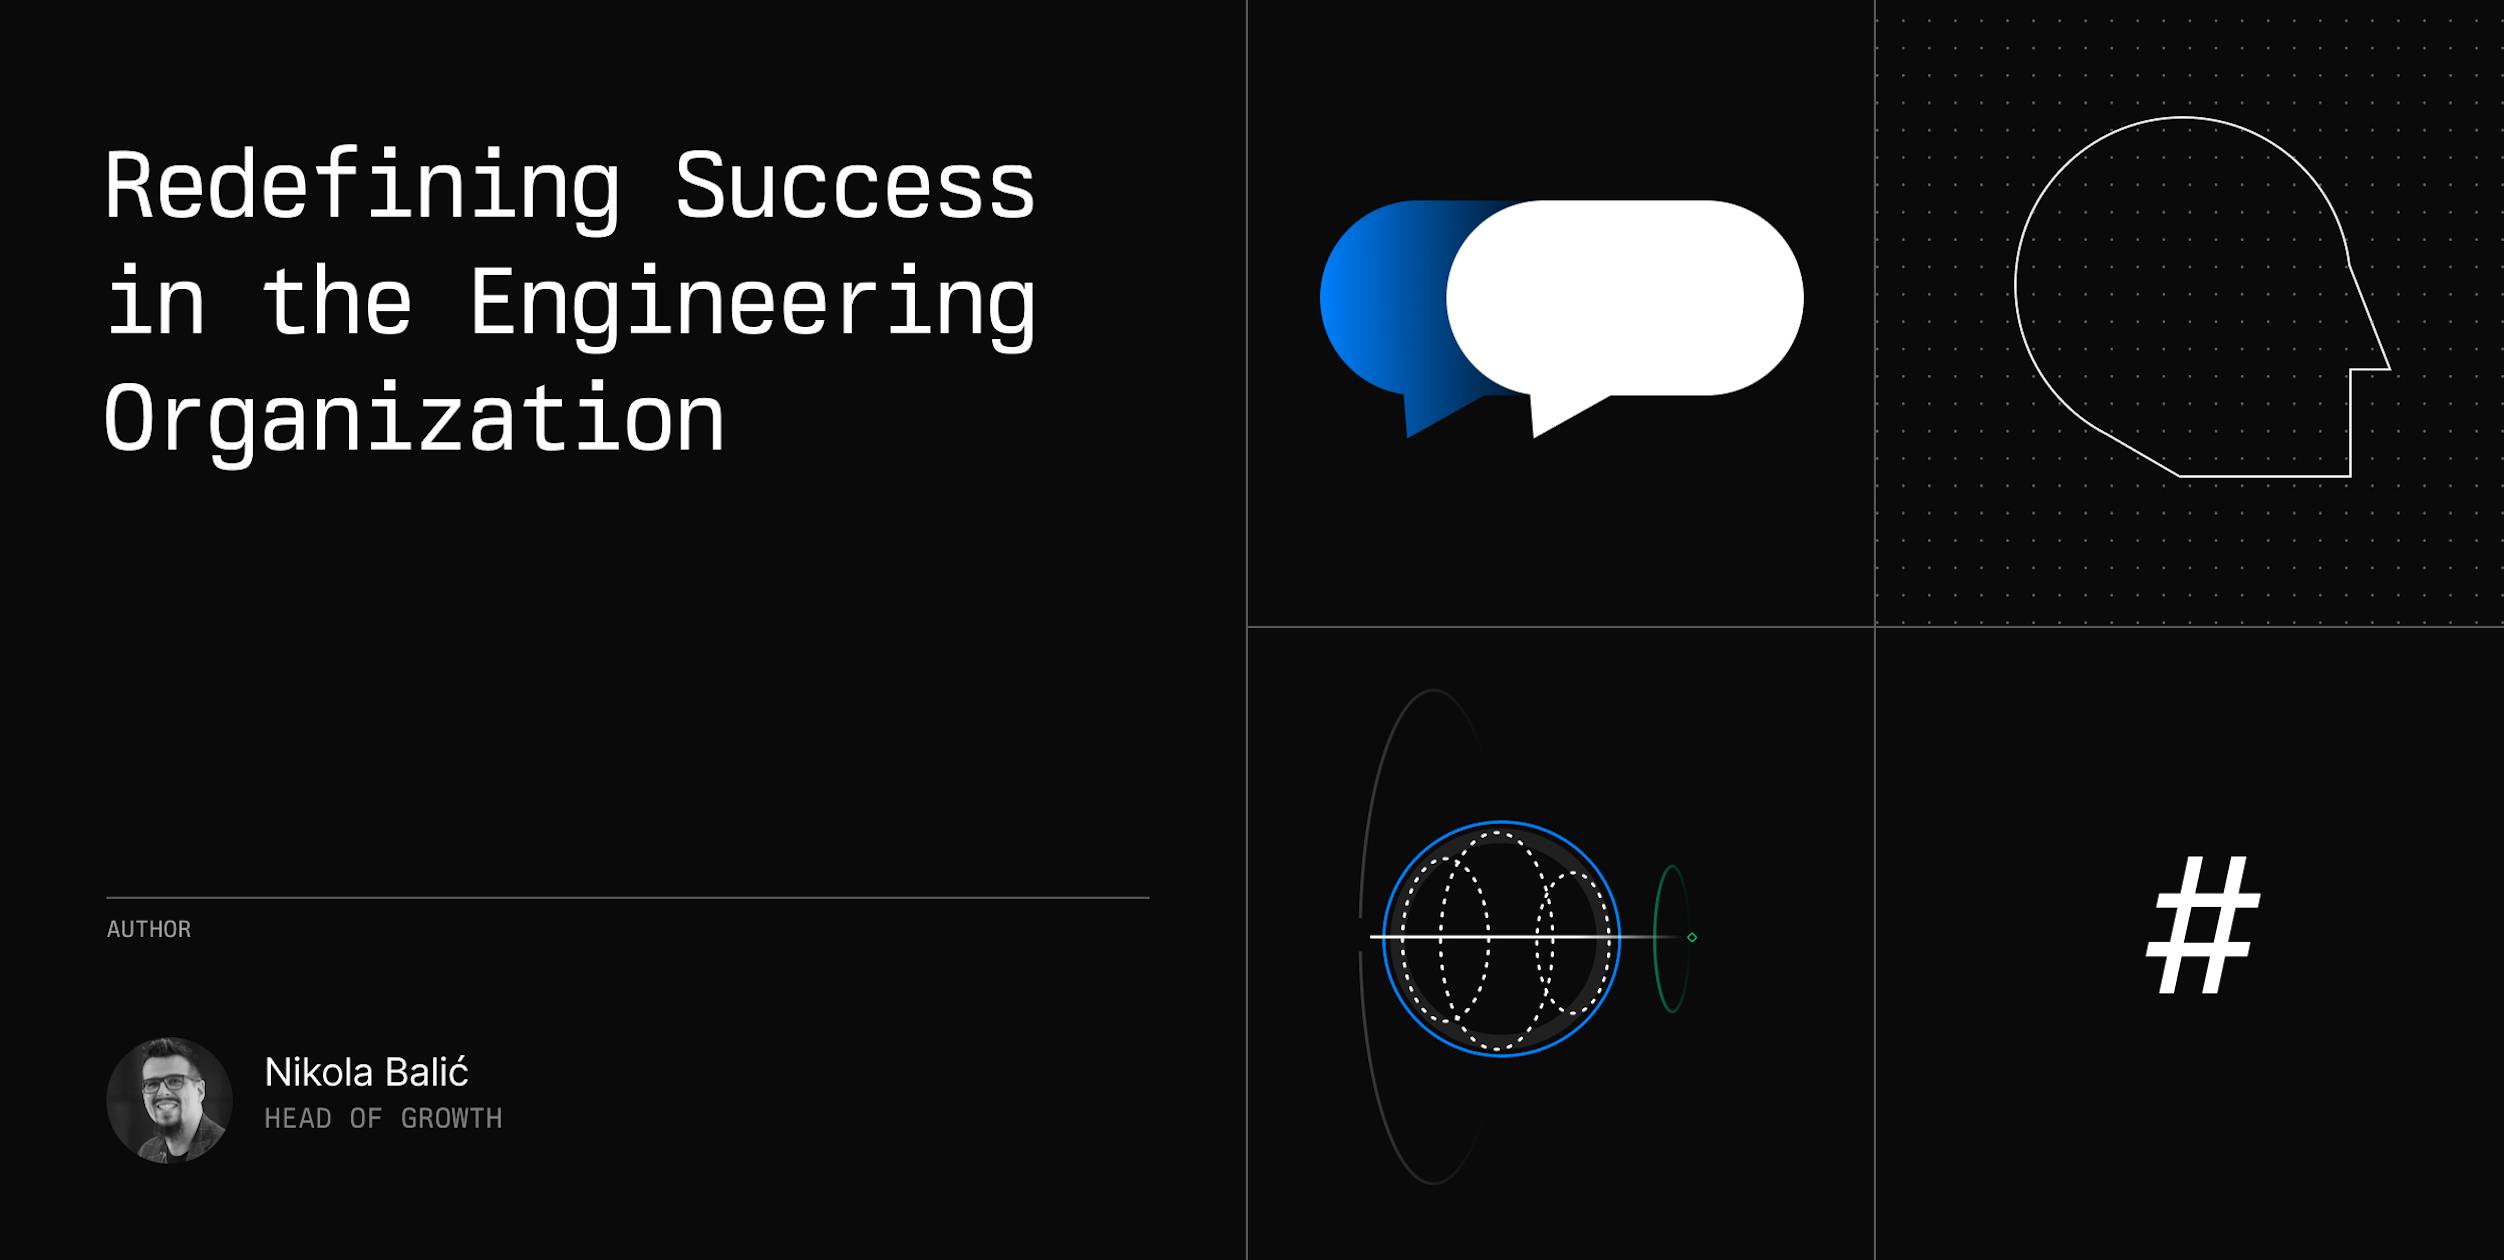 Redefining Success in the Engineering Organization